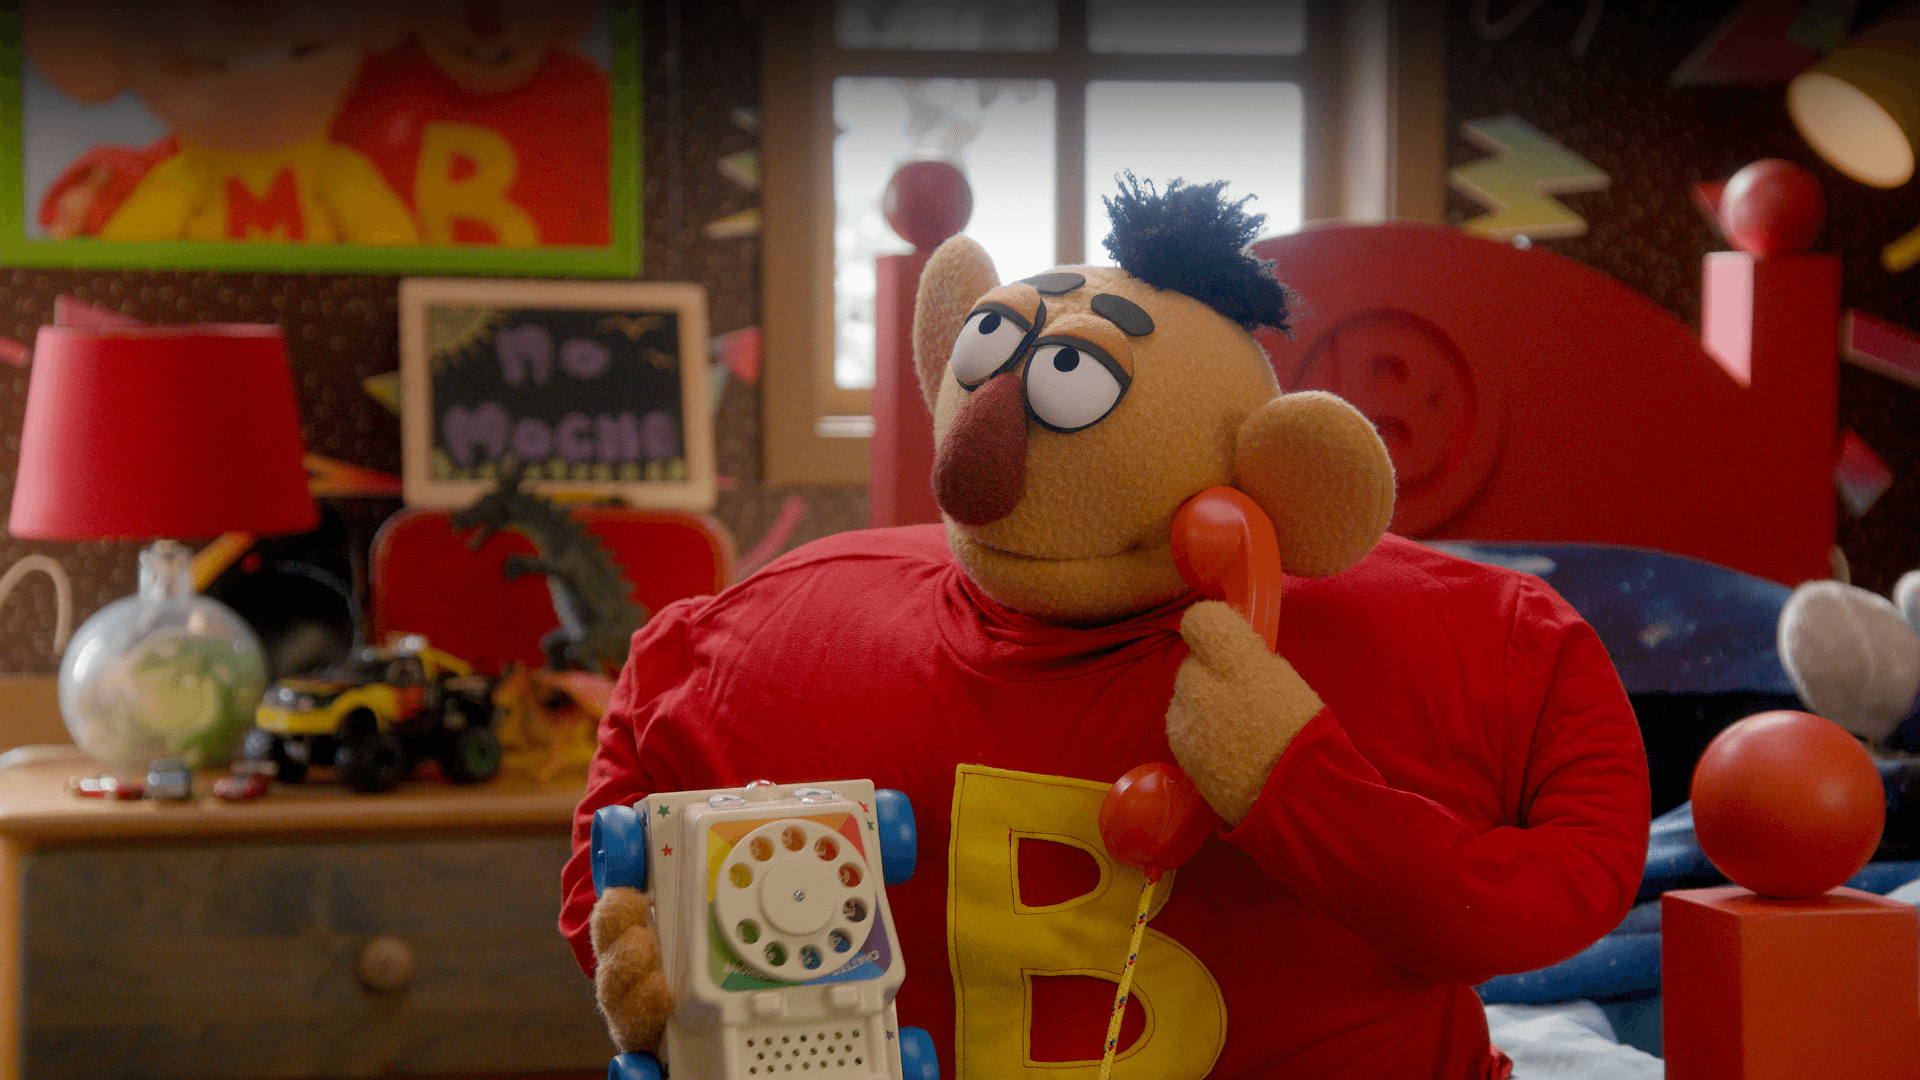 Tim Heidecker portrays Brad, a puppet making a prank phone call on Comedy Central's Crank Yankers, edited by Todd Bishop